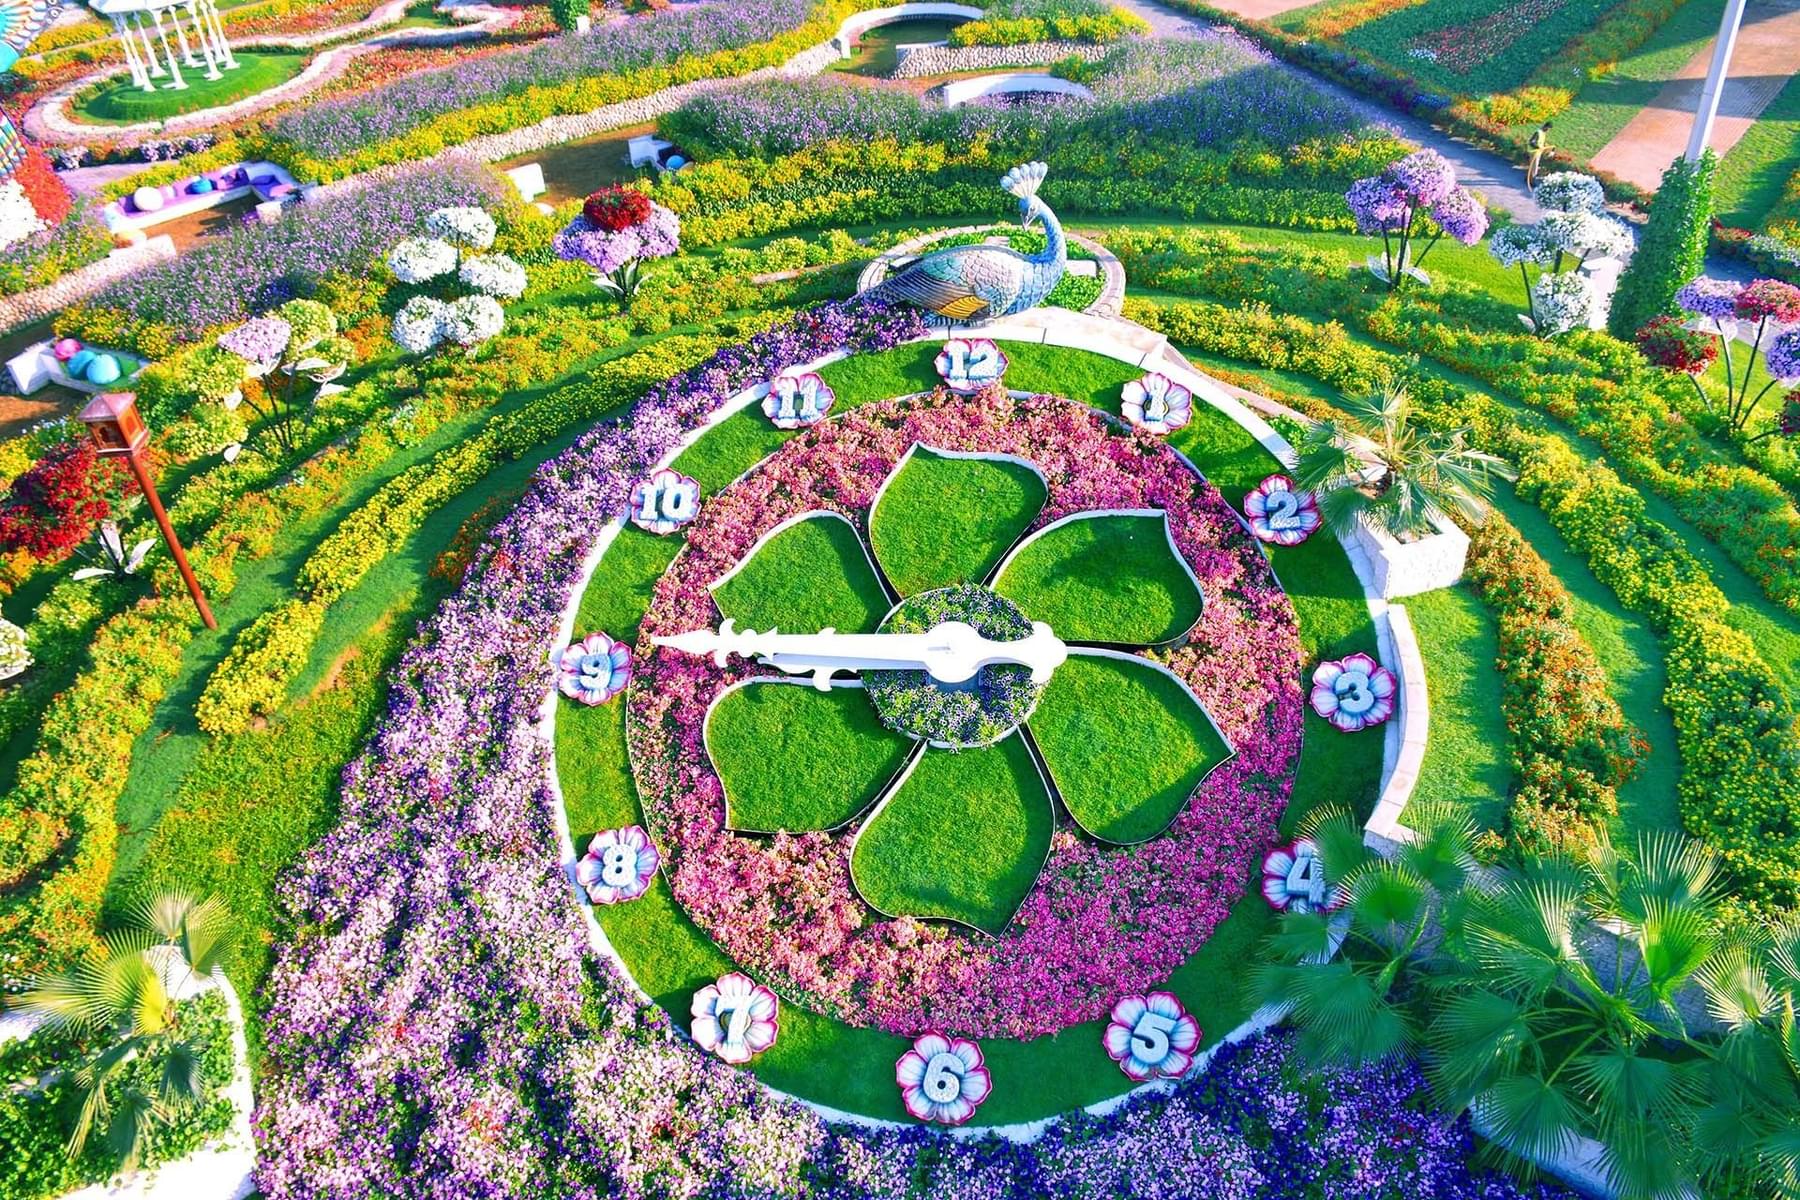 Connect With Nature At Dubai Miracle Garden